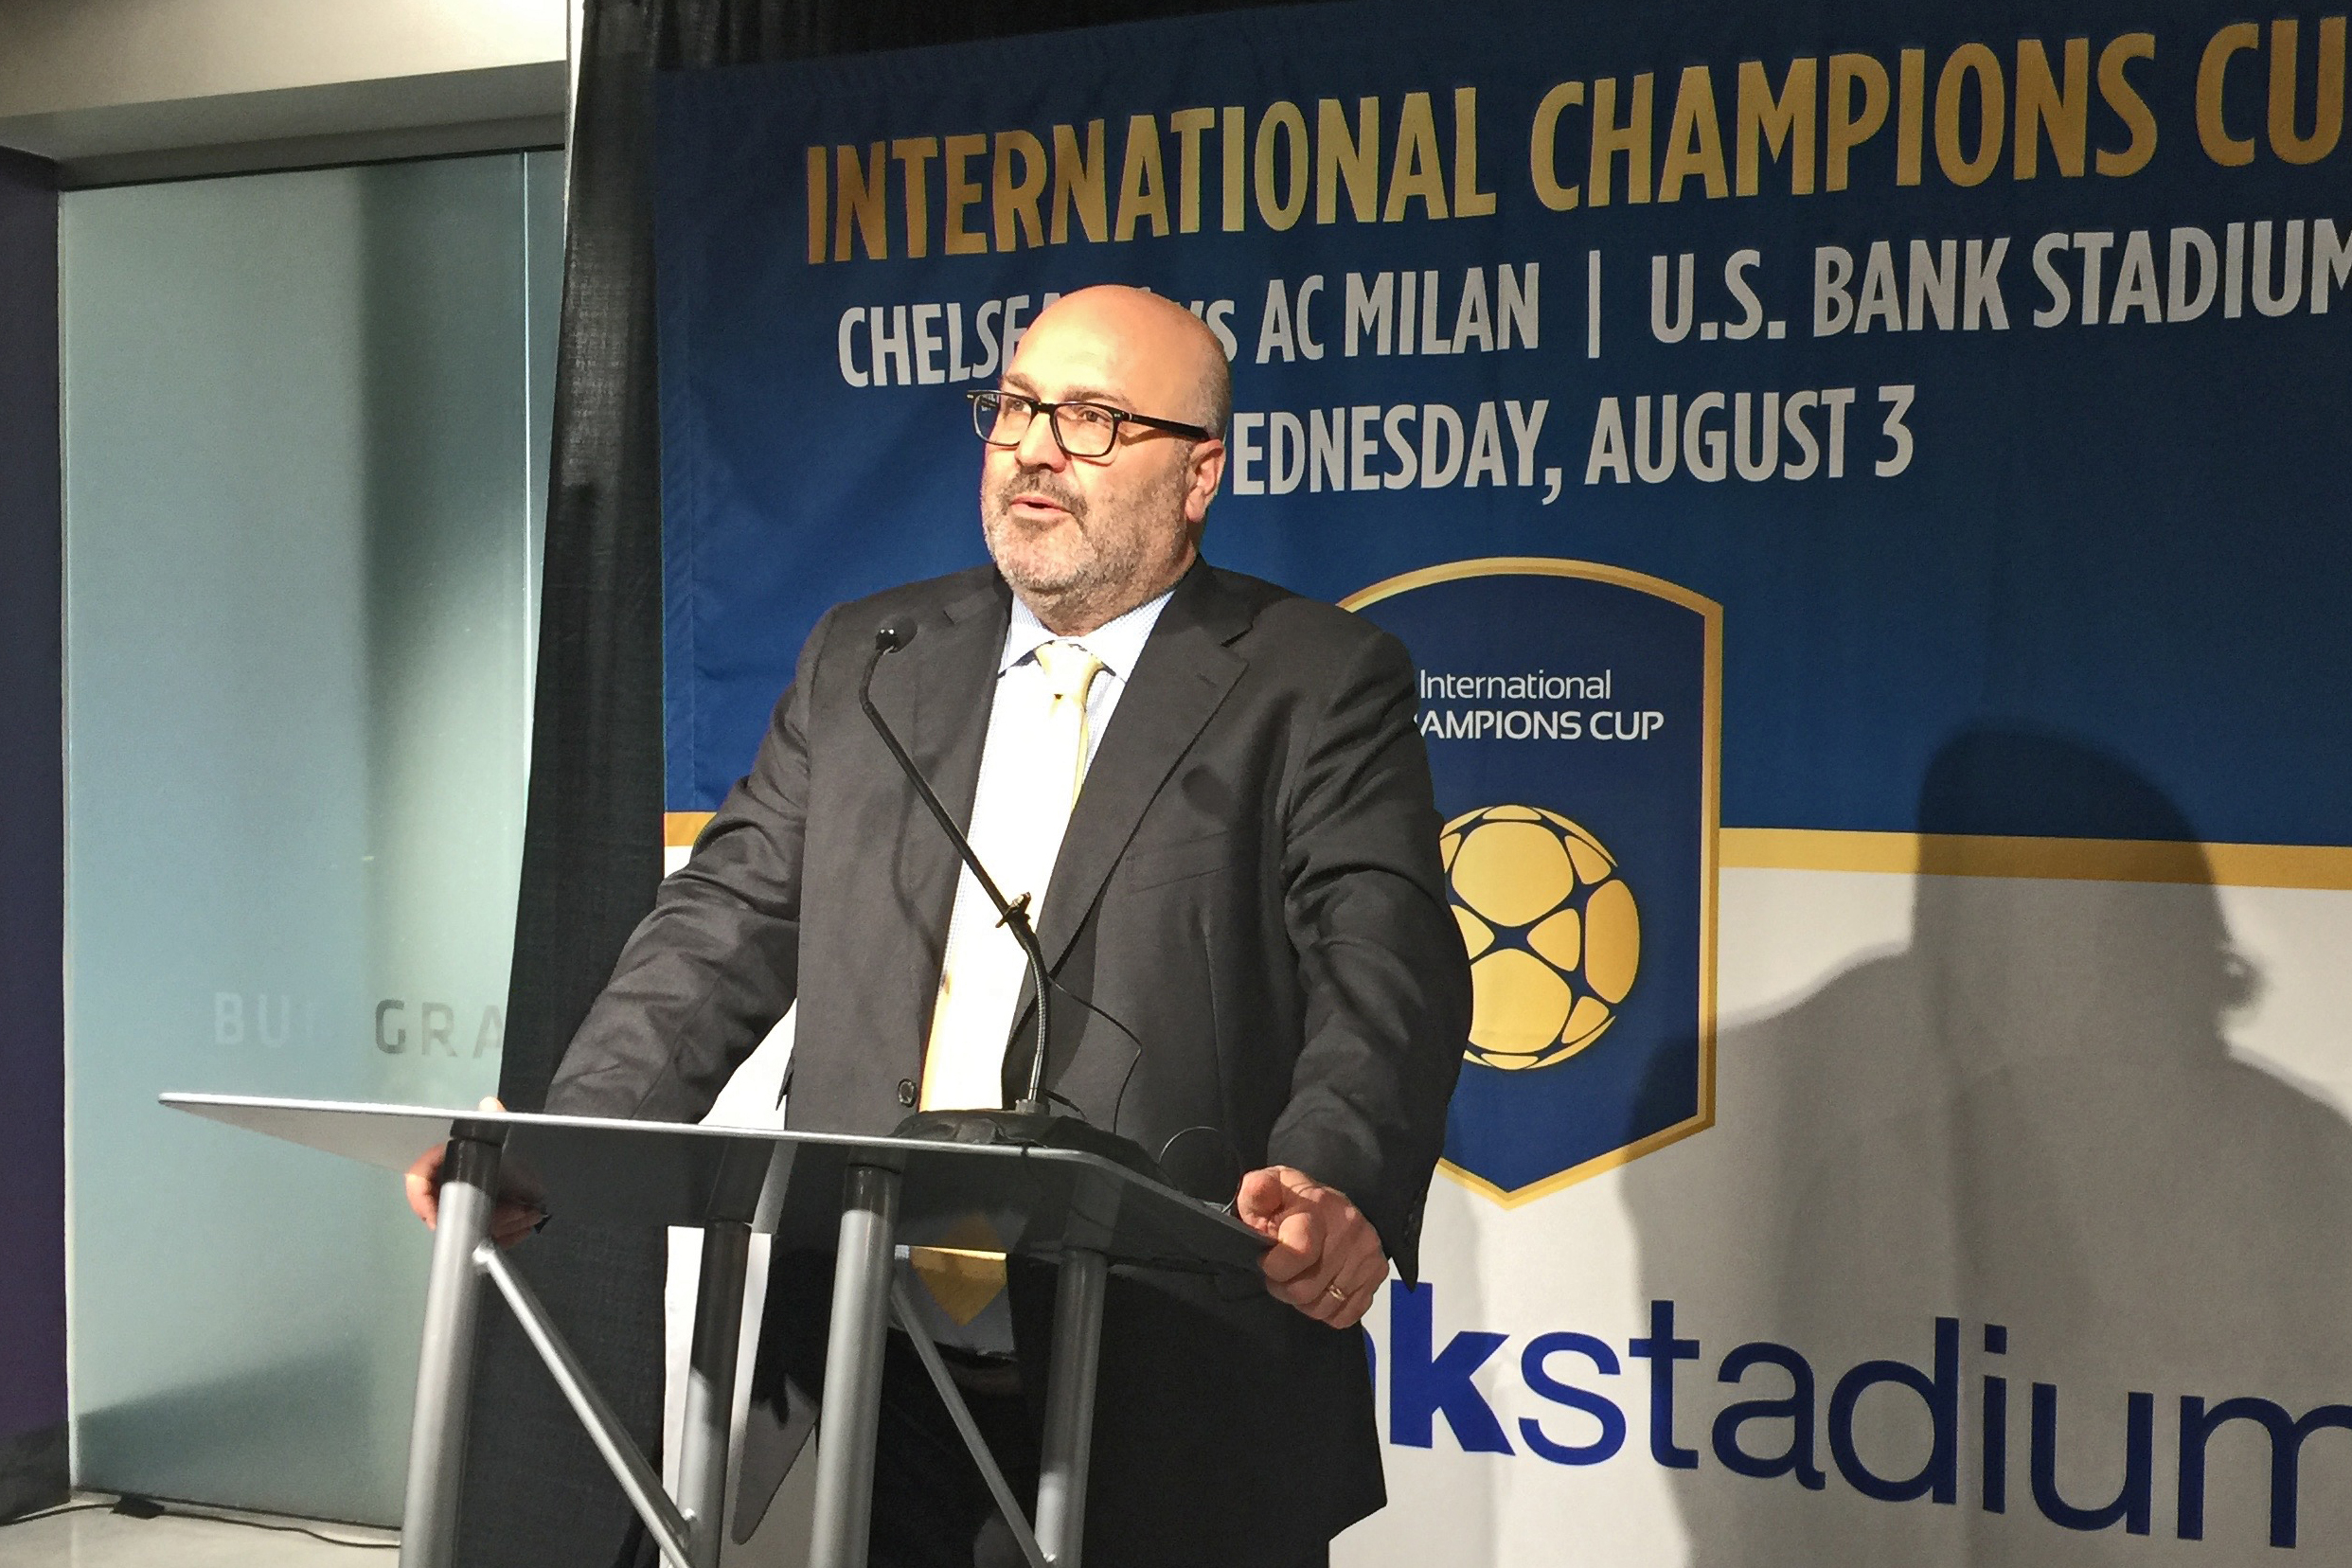 Stadium Details Emerge for ICC Match between European Giants AC Milan and Chelsea FC